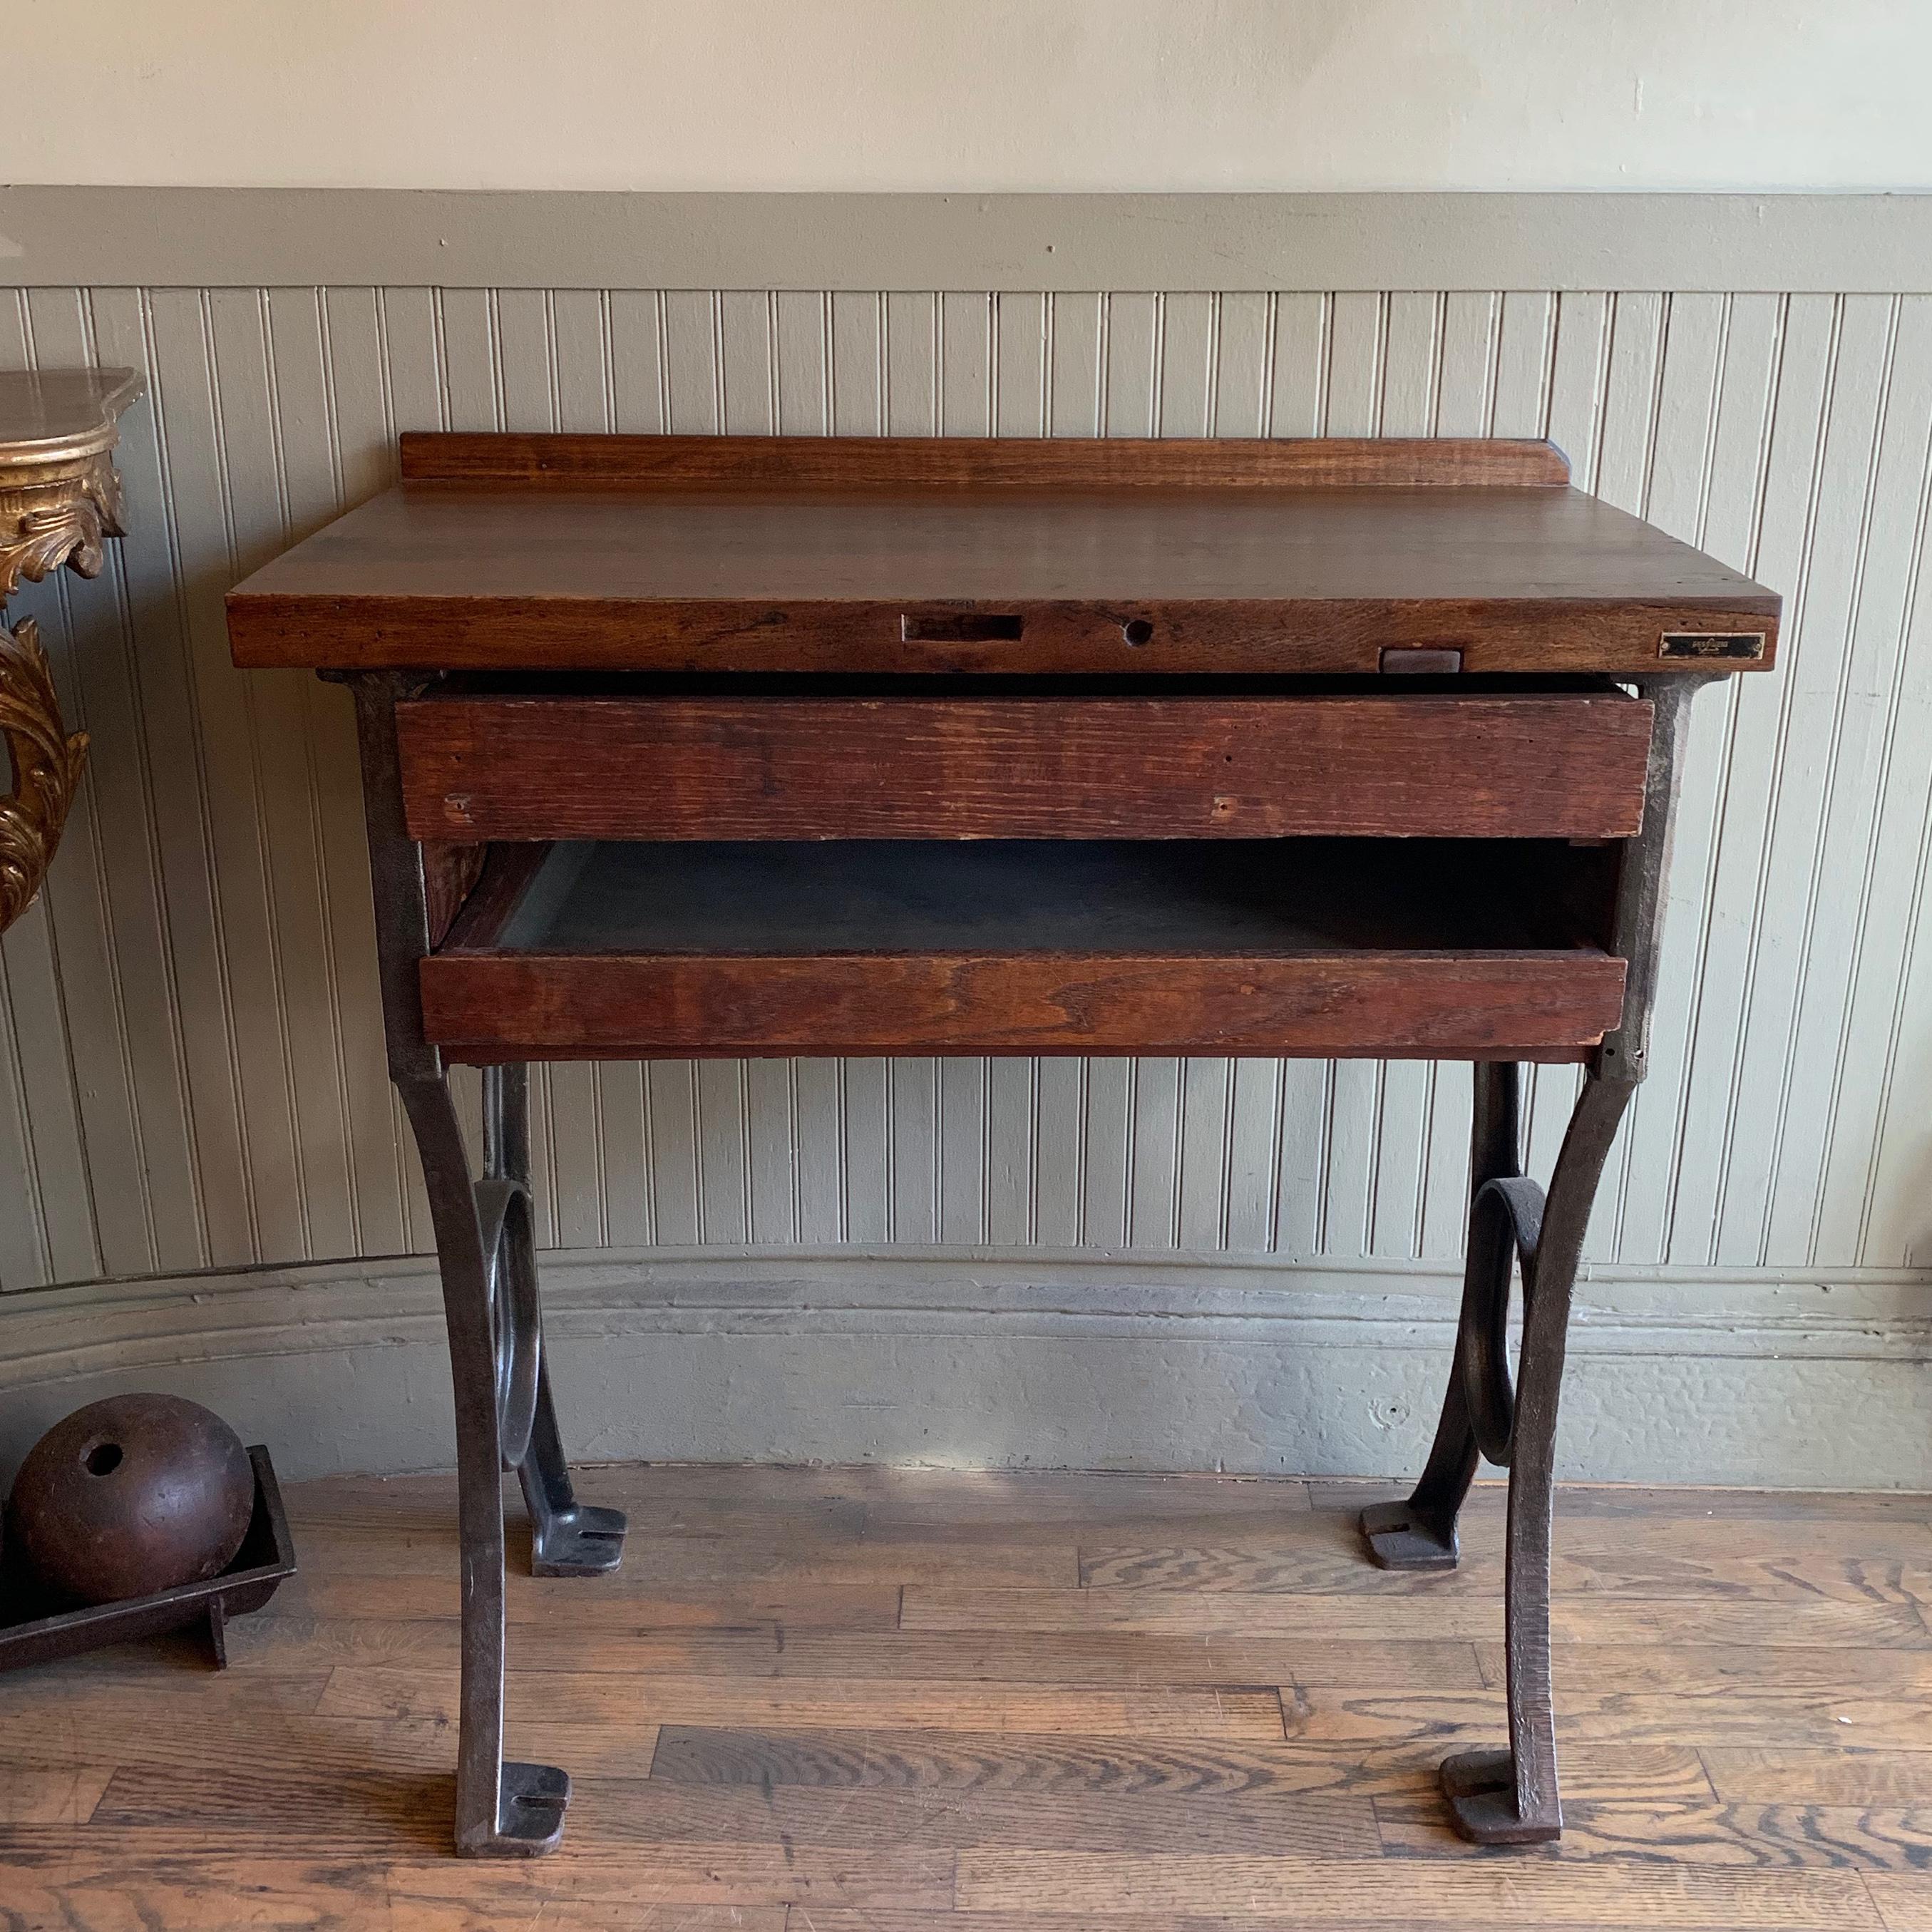 Vintage, 1930s, Industrial, jeweler's bench or work table manufactured by Gesswein, New York features a wonderfully patinated, stained maple top with two pull-out drawers in a cast iron frame.